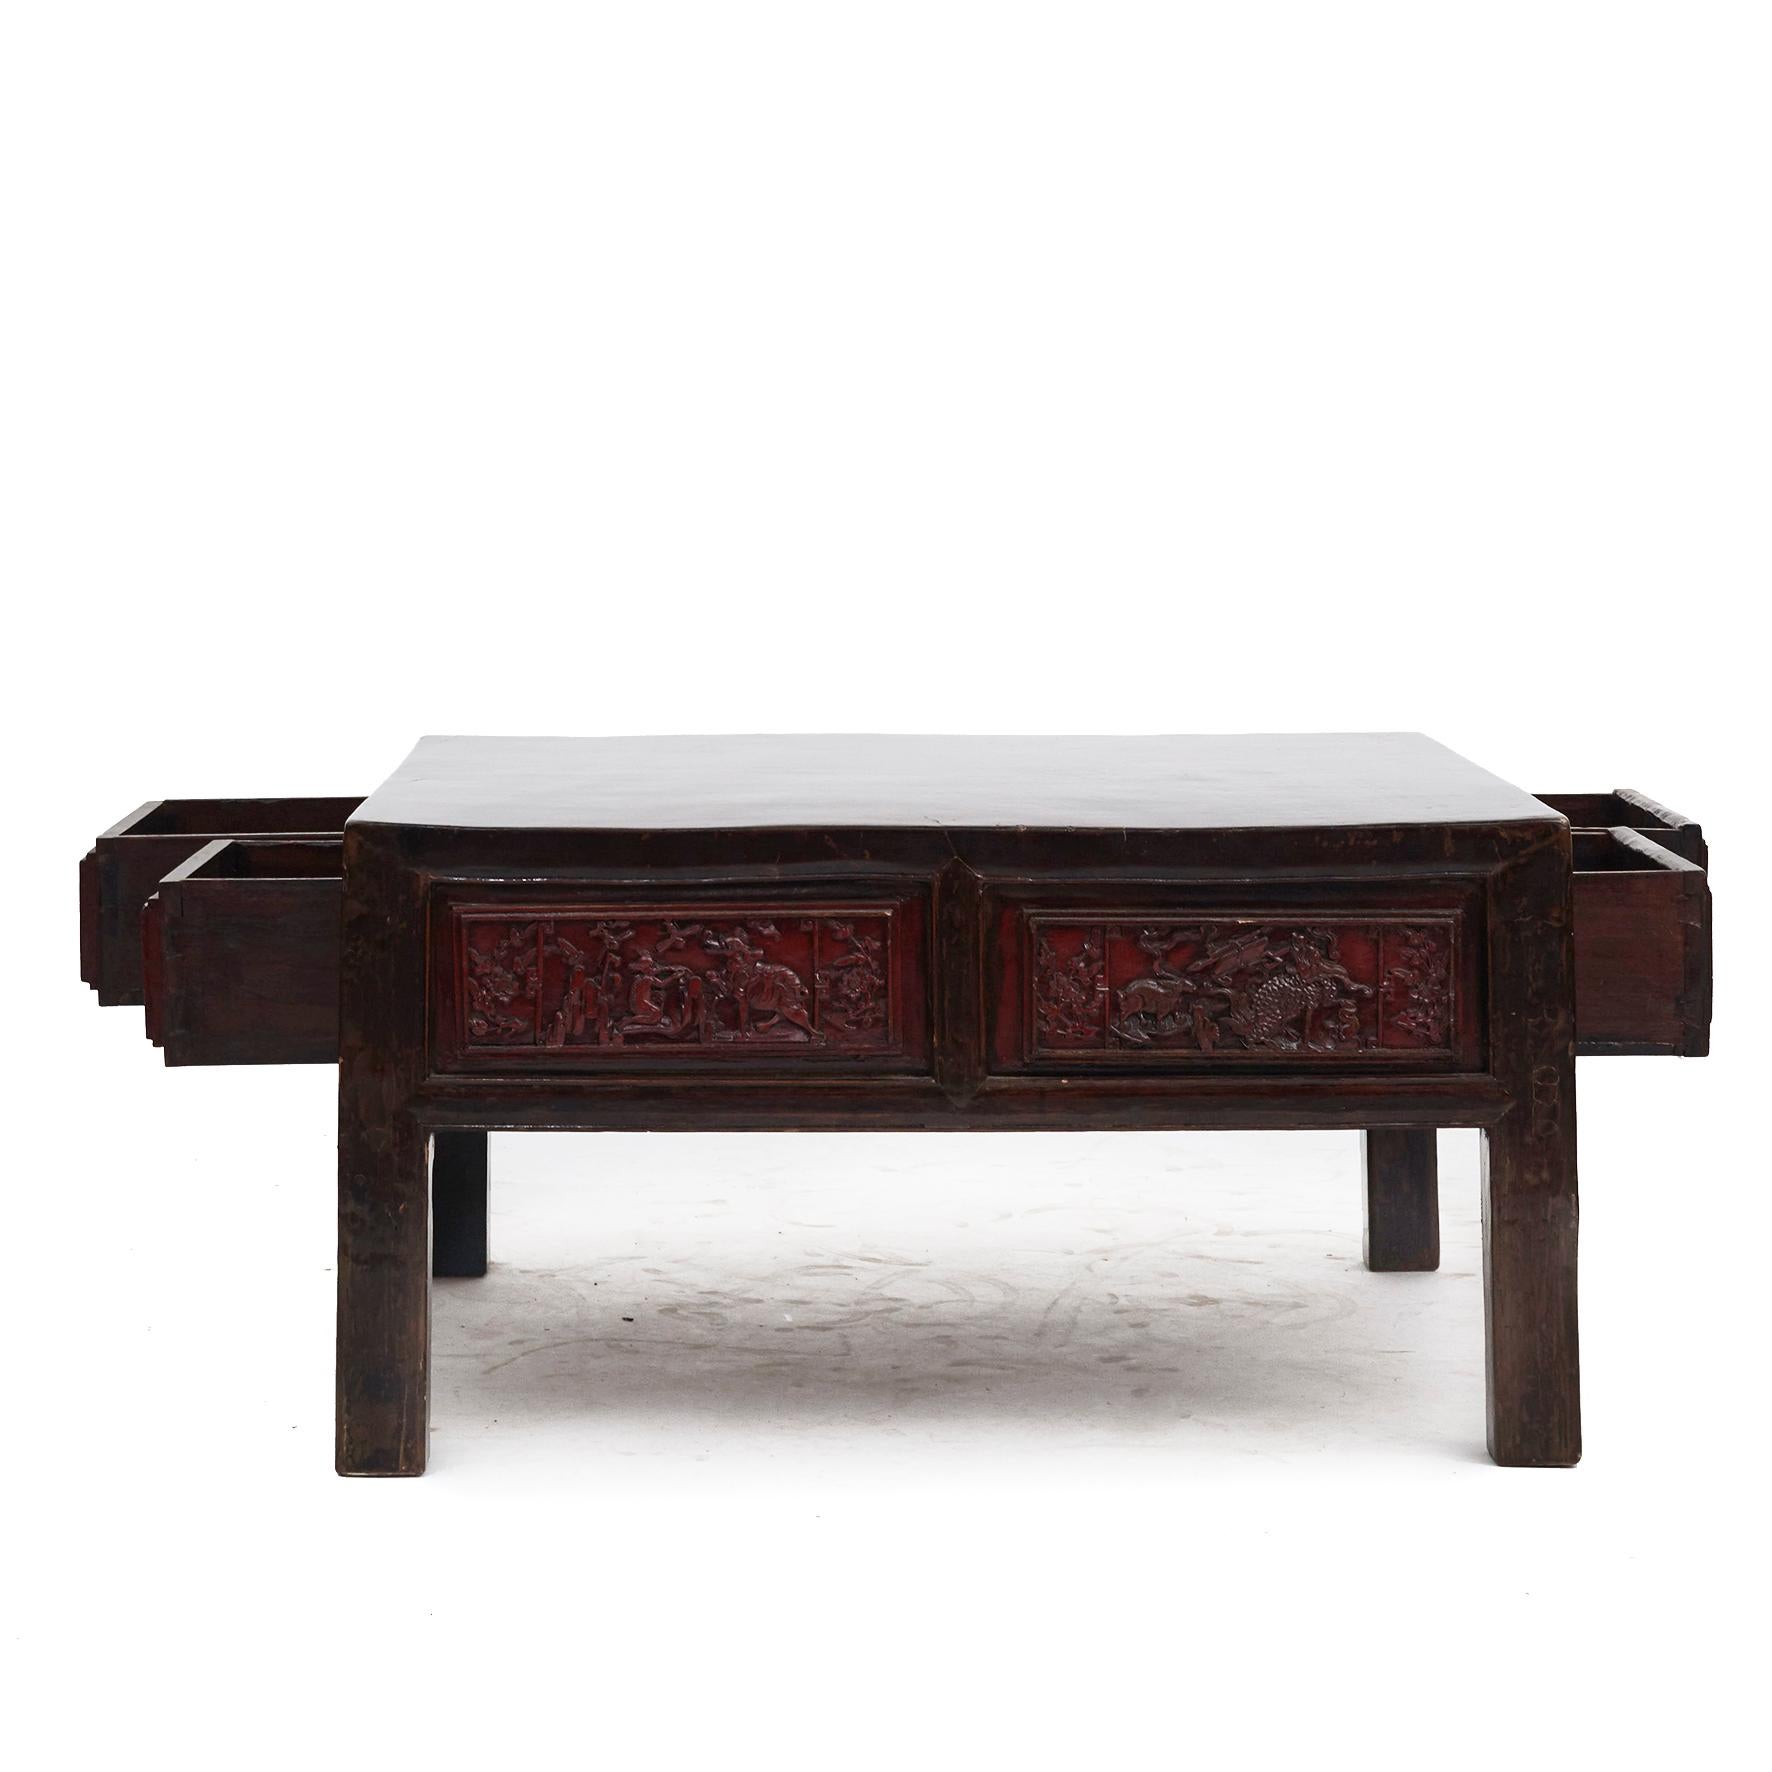 Coffee table made of rare iron wood. With red lacquer and image carving in the form of vases etc. made in high quality.
Original colors with beautiful age-related patina, highlighted by a clear lacquer surface finish.

Shanxi Province 1850-1870.